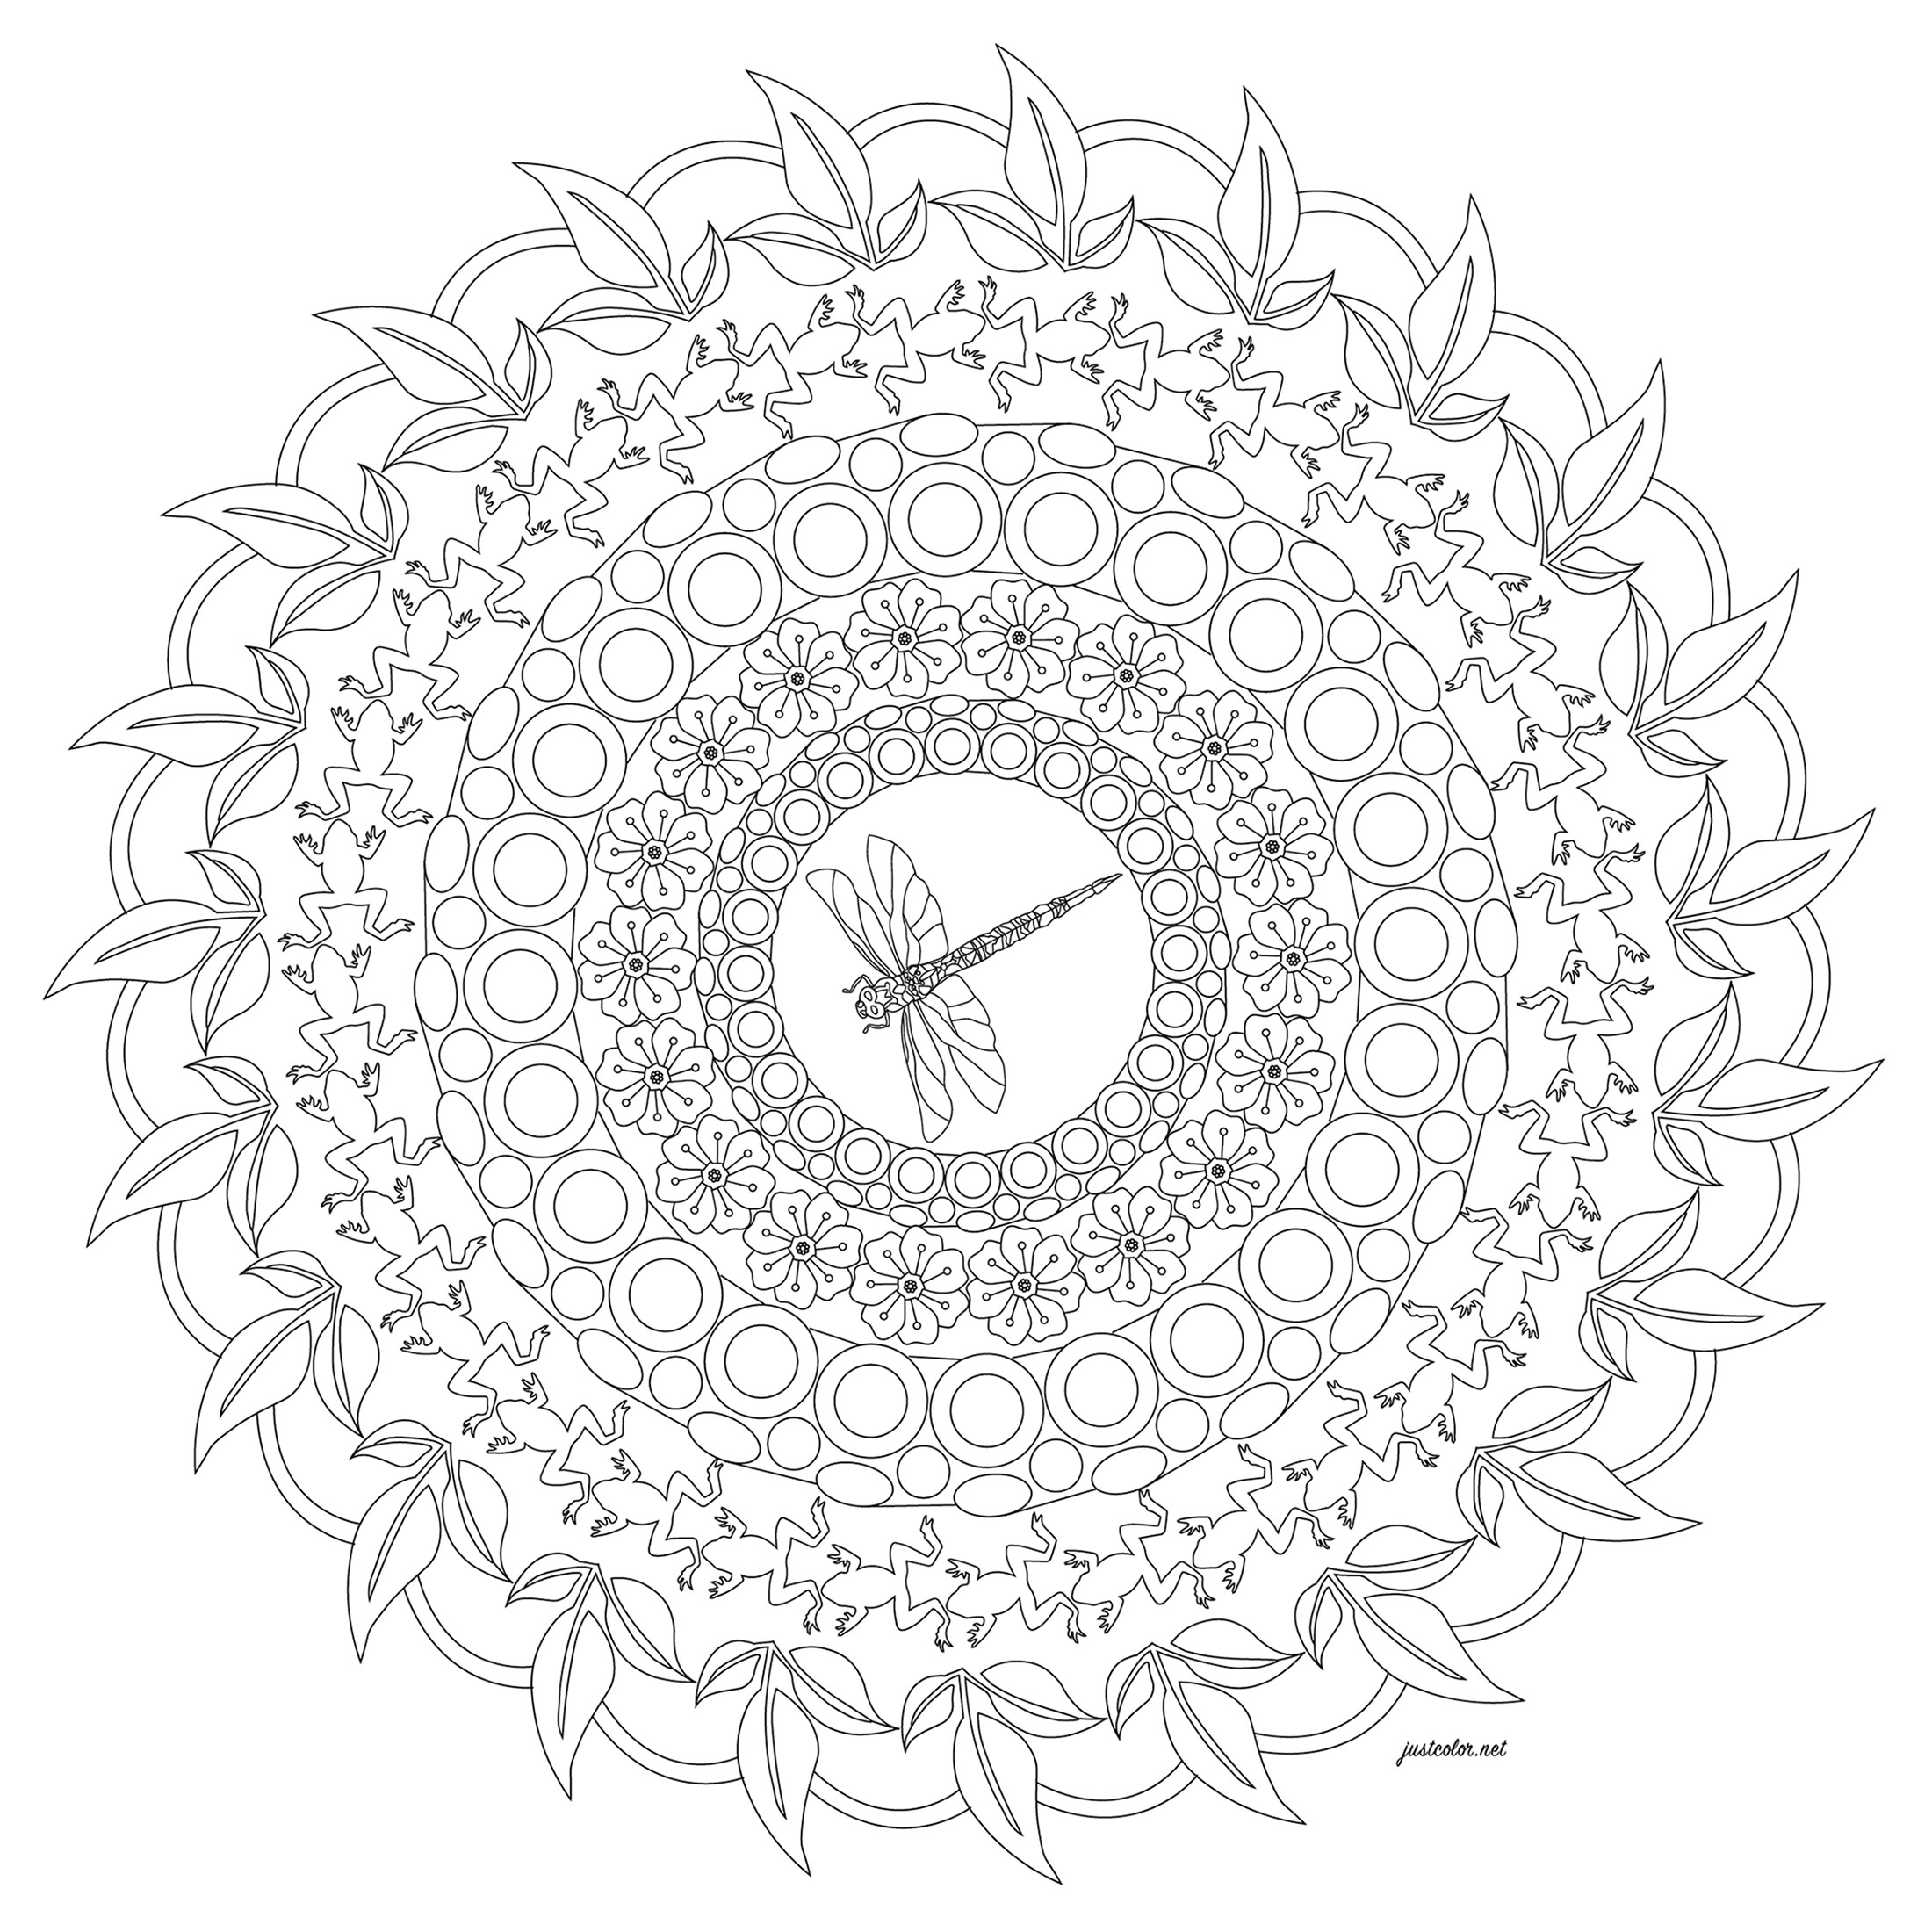 Color this Mandala with a dragonfly in the center. Do you see the frogs ?, Artist : Morgan